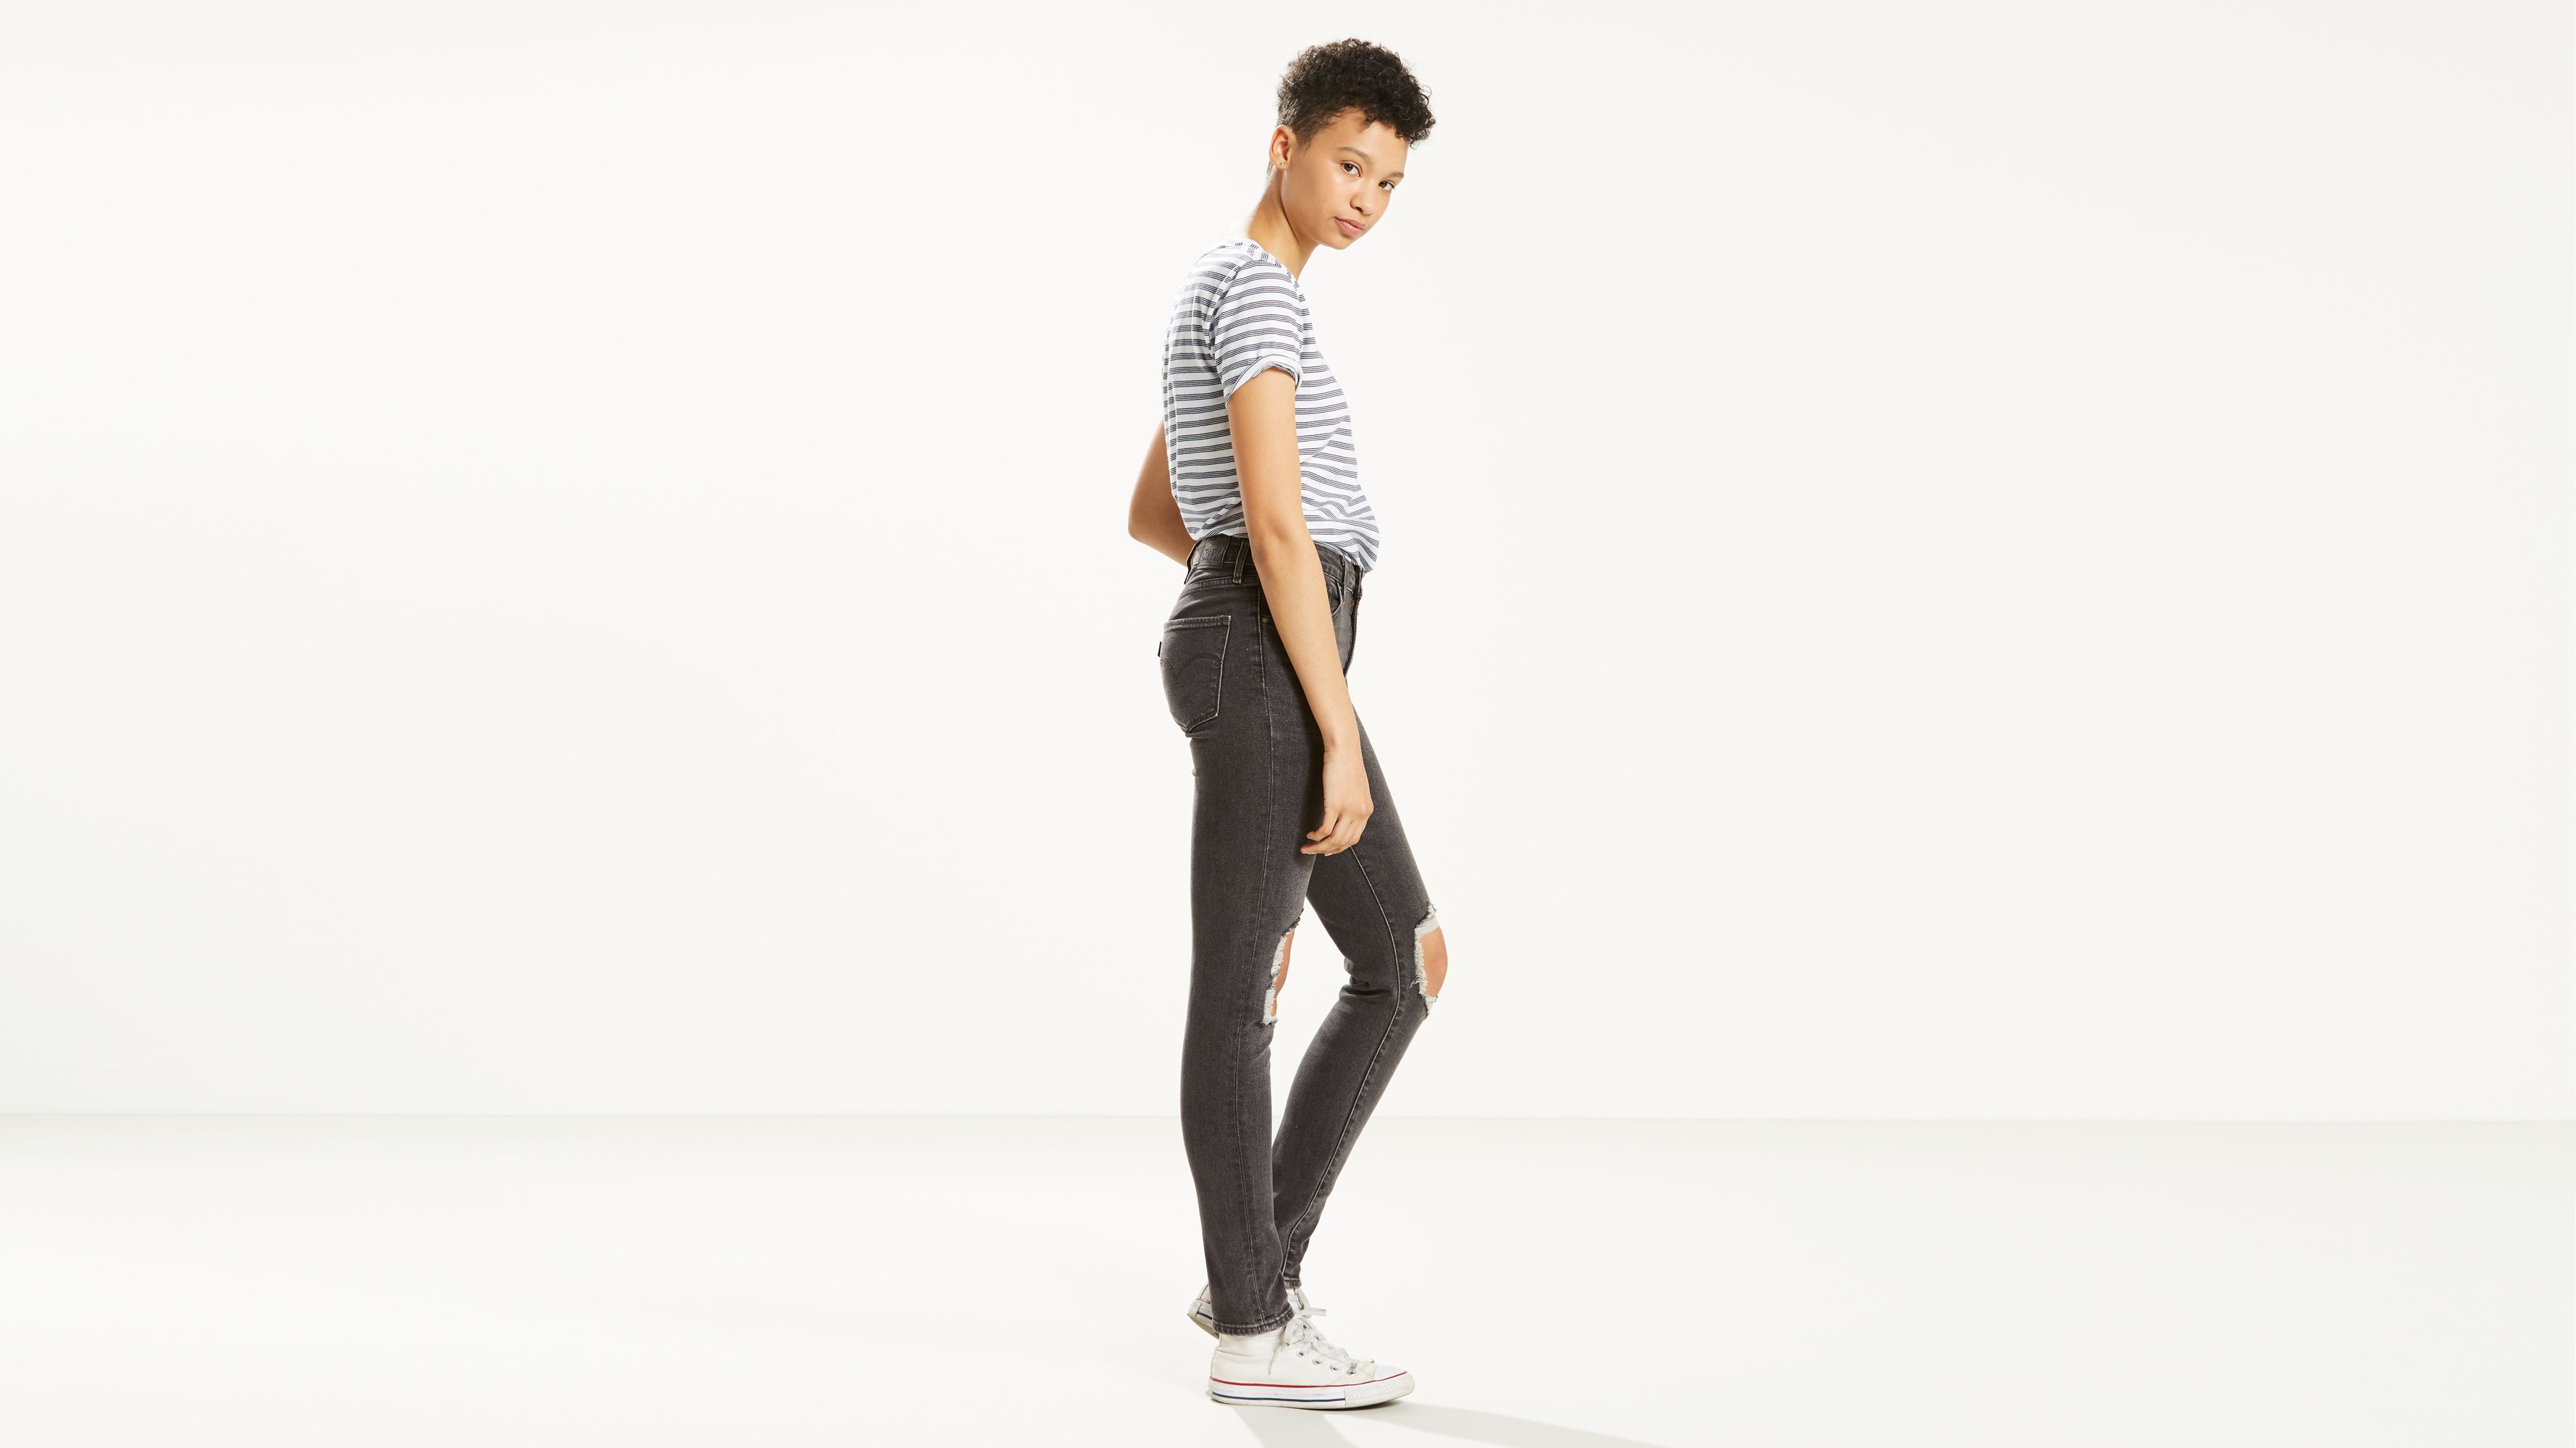 levi's 721 ripped high rise skinny